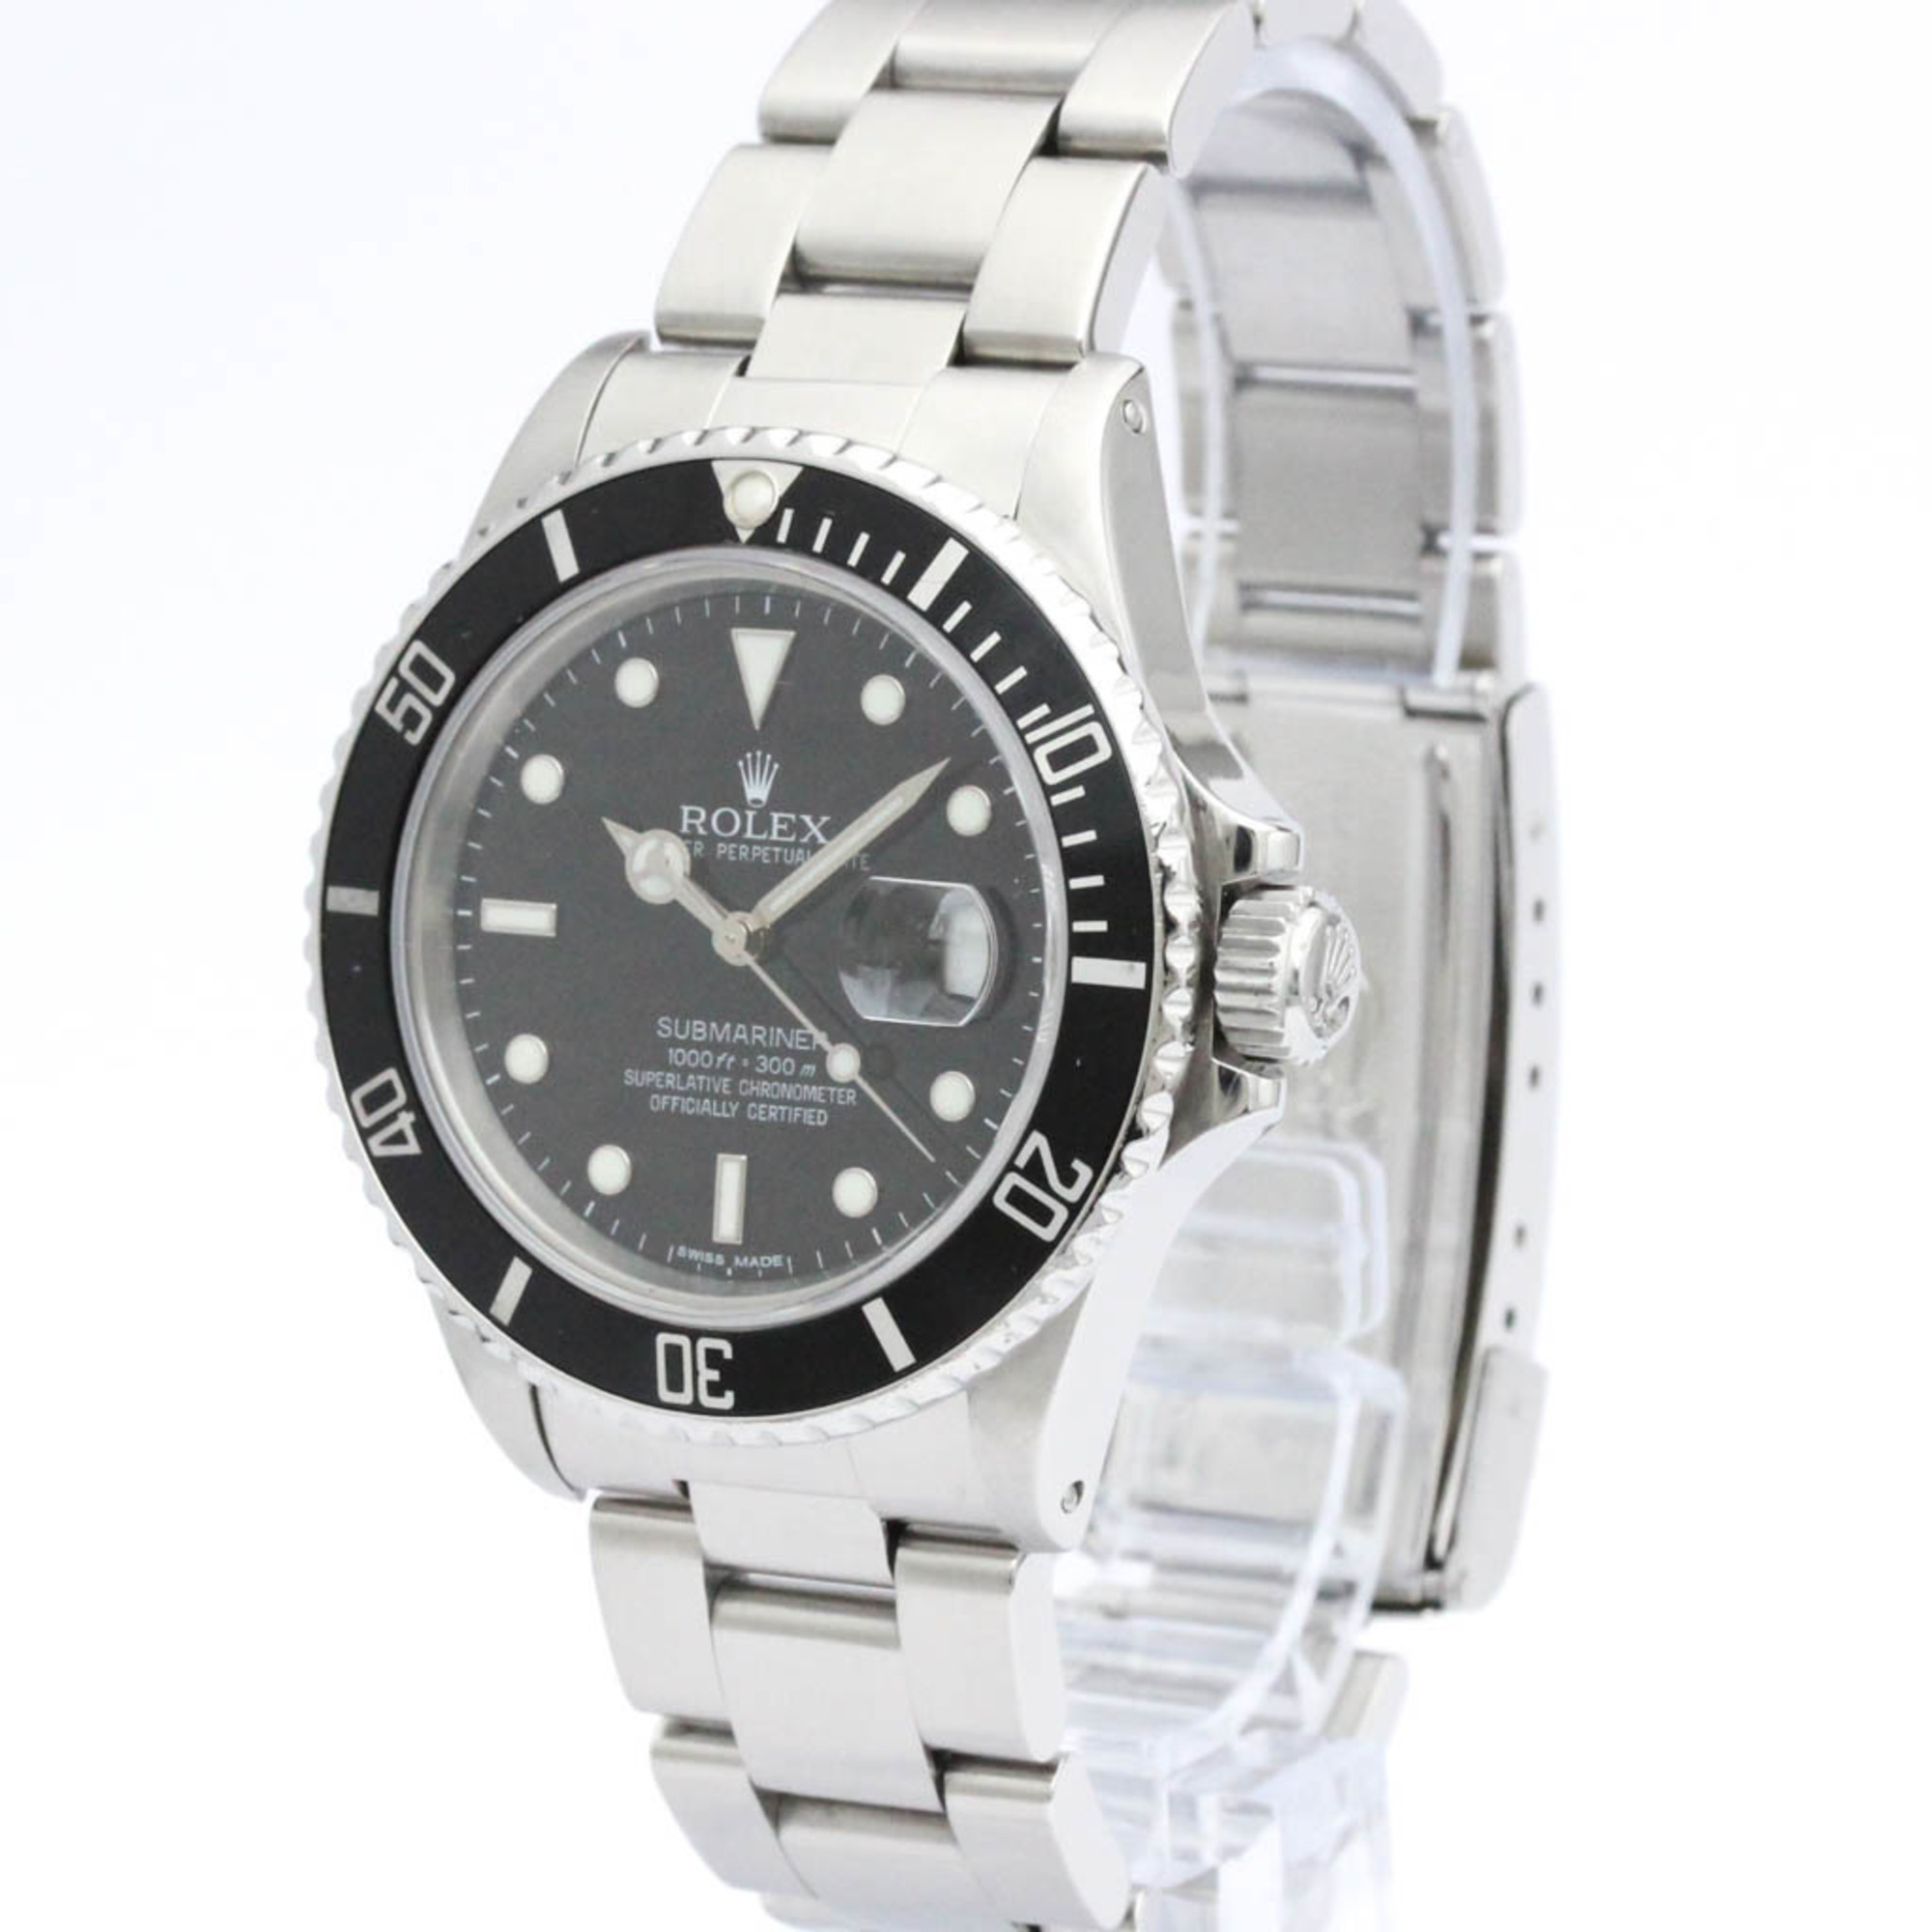 Polished ROLEX Submariner Triple Zero Steel Automatic Mens Watch 168000 BF560826